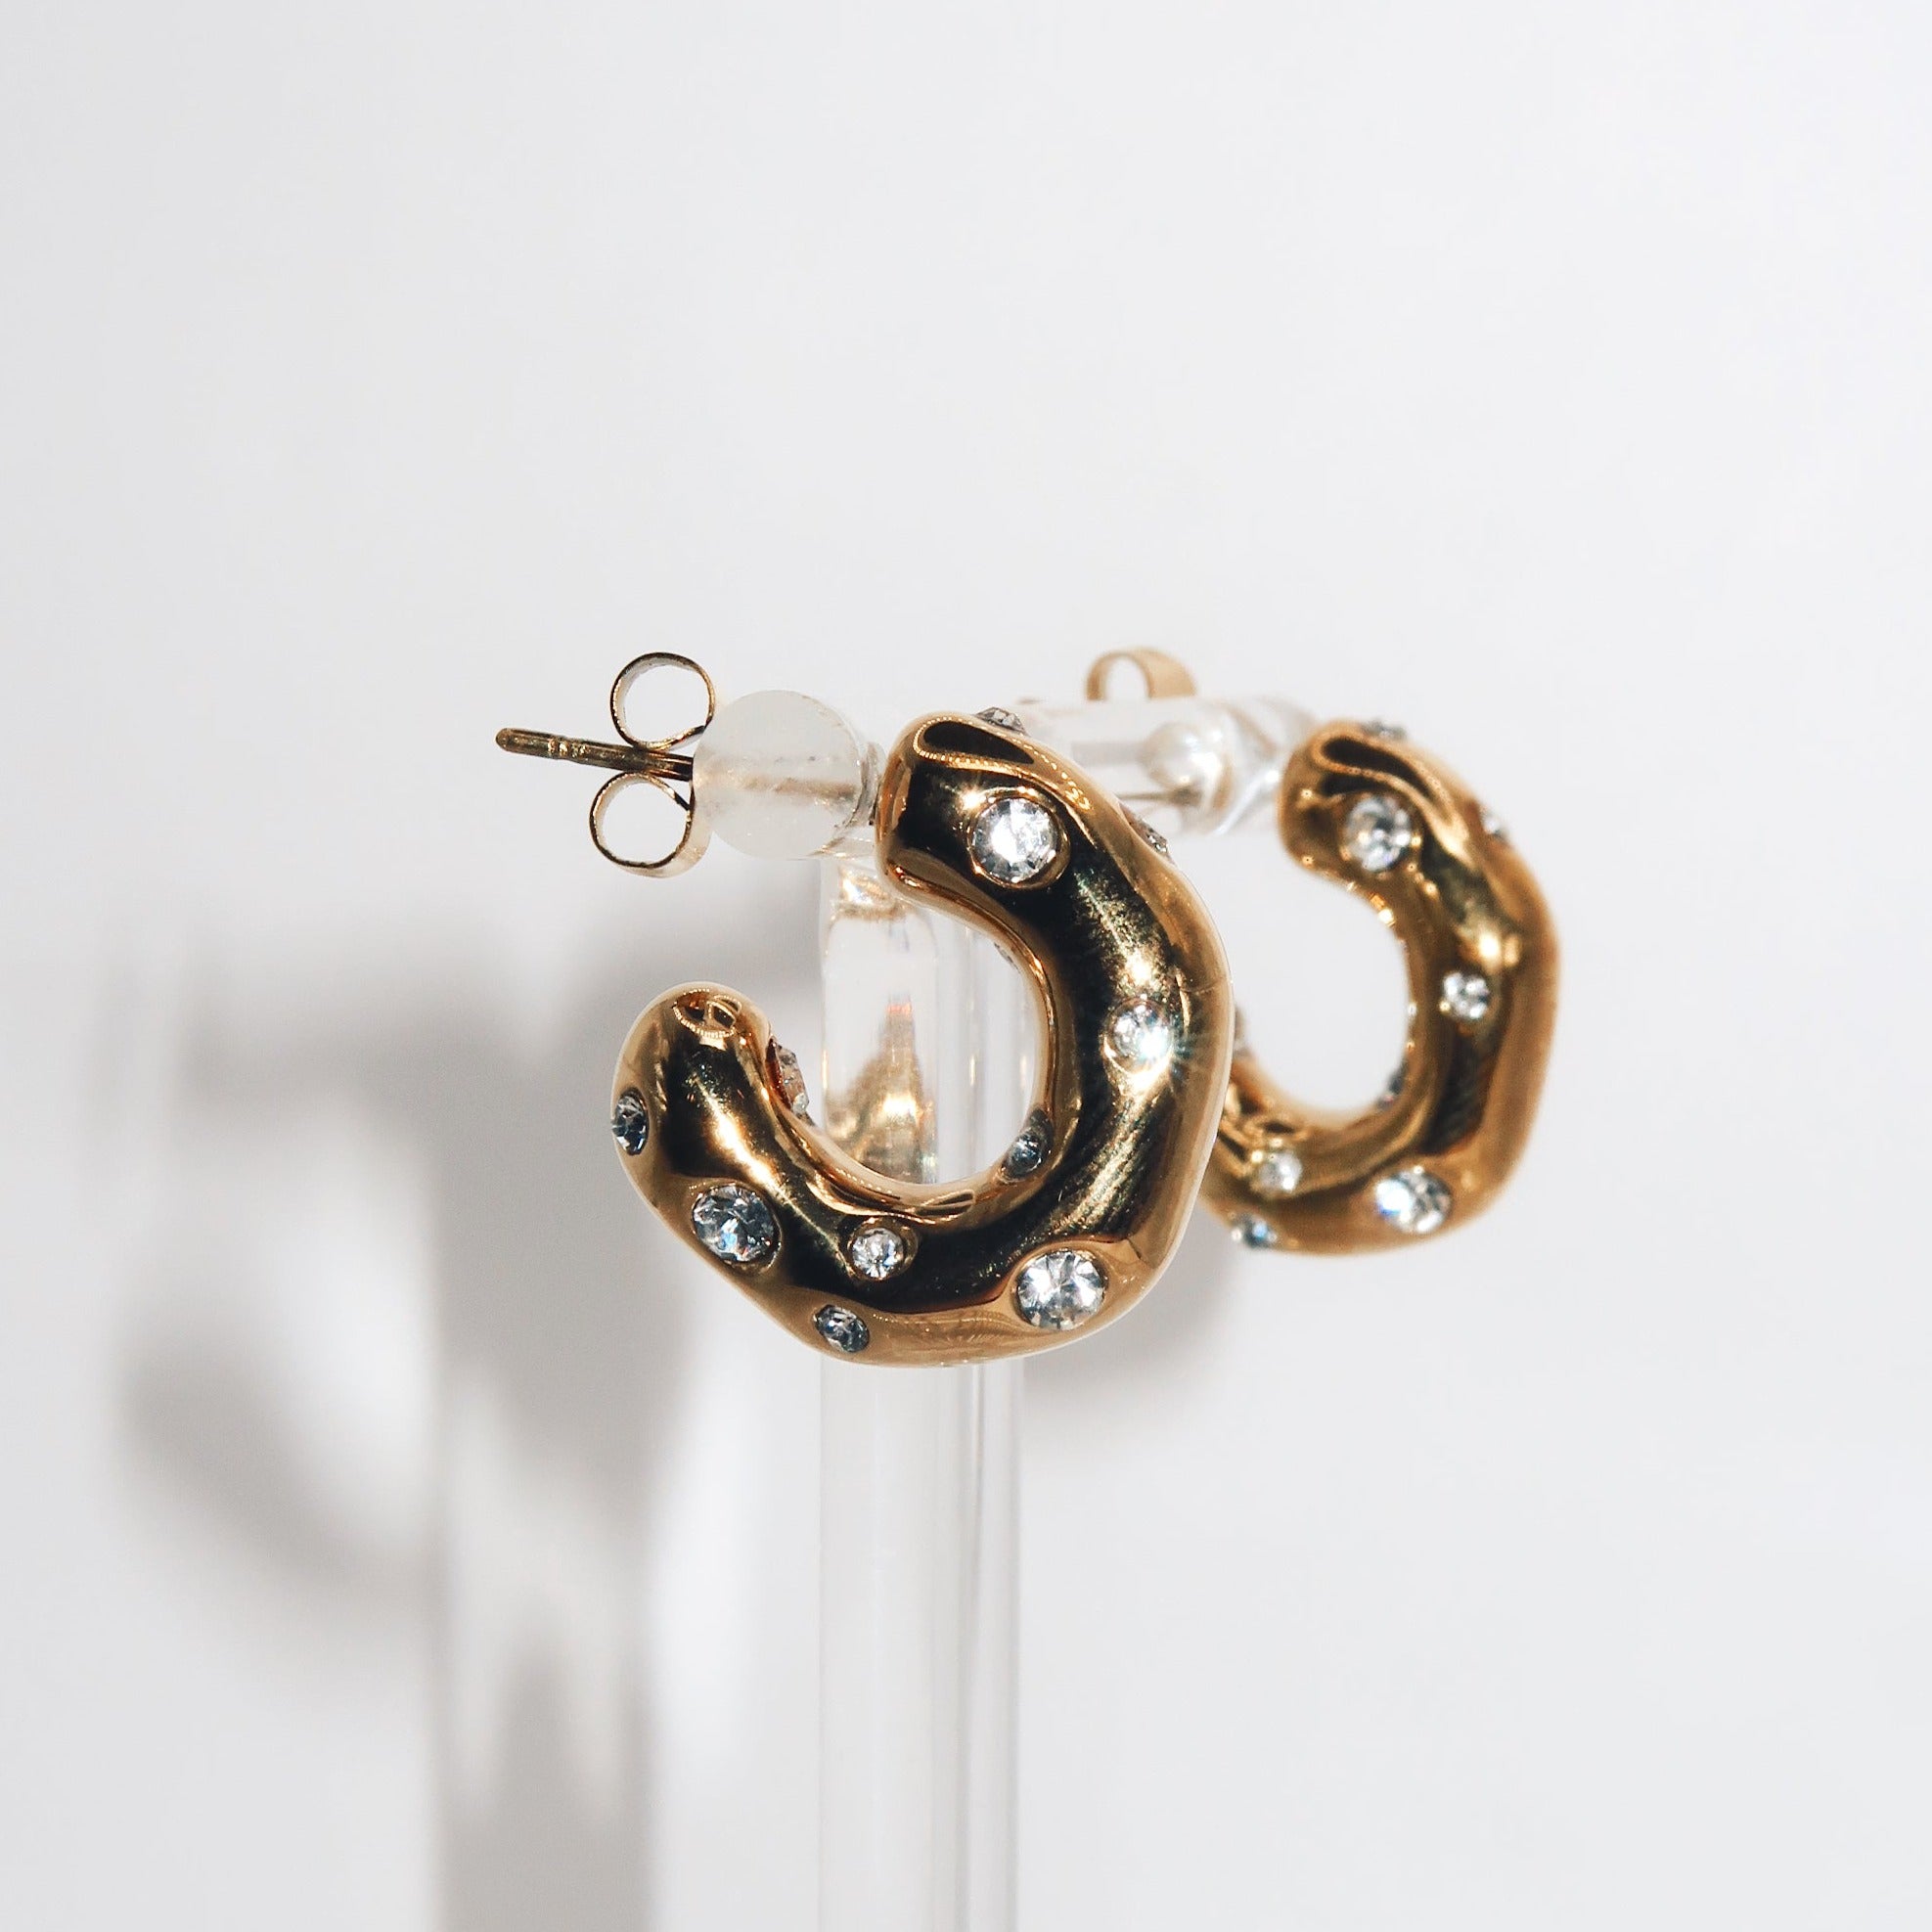 GIN - 18k PVD Gold Plated Small Chunky Earrings with CZ Stones Detailing - Mixed Metals